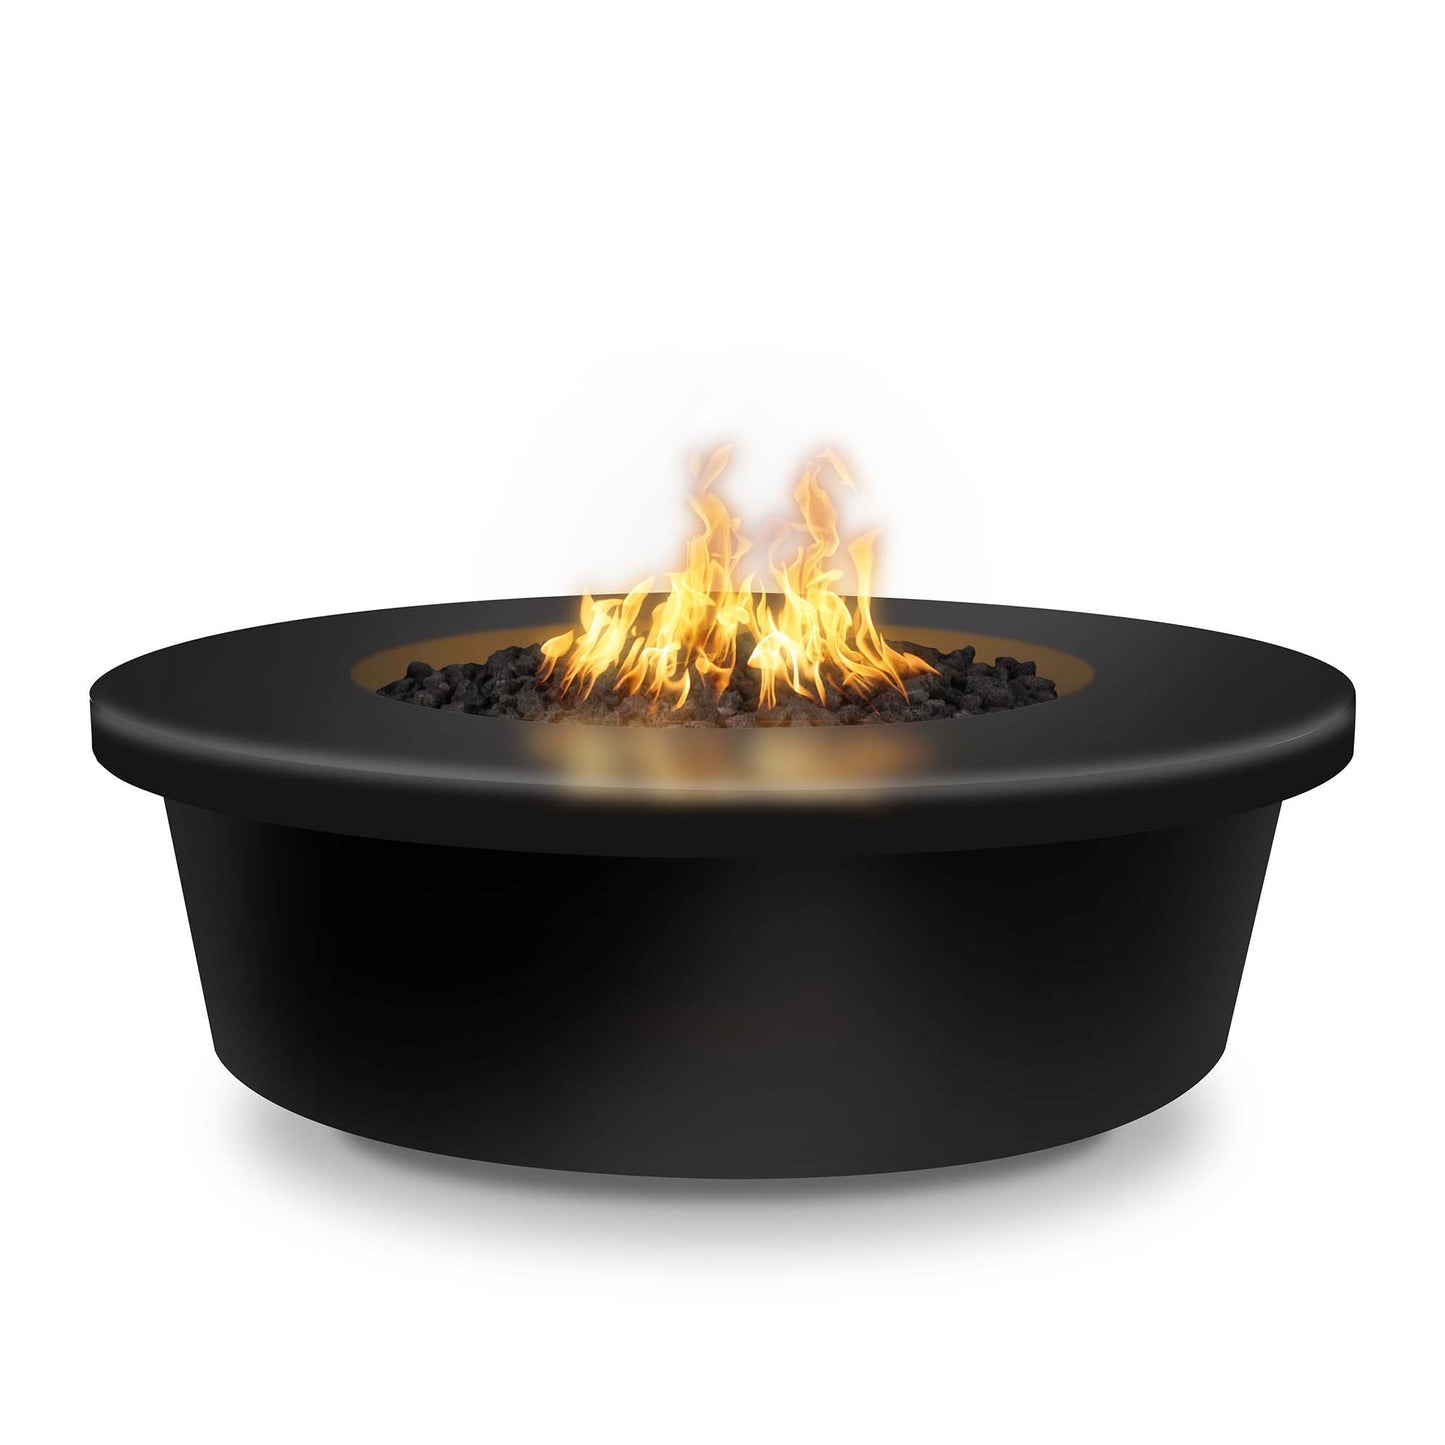 The Outdoor Plus Round Tempe 48" Stainless Steel Natural Gas Fire Pit with Flame Sense with Spark Ignition